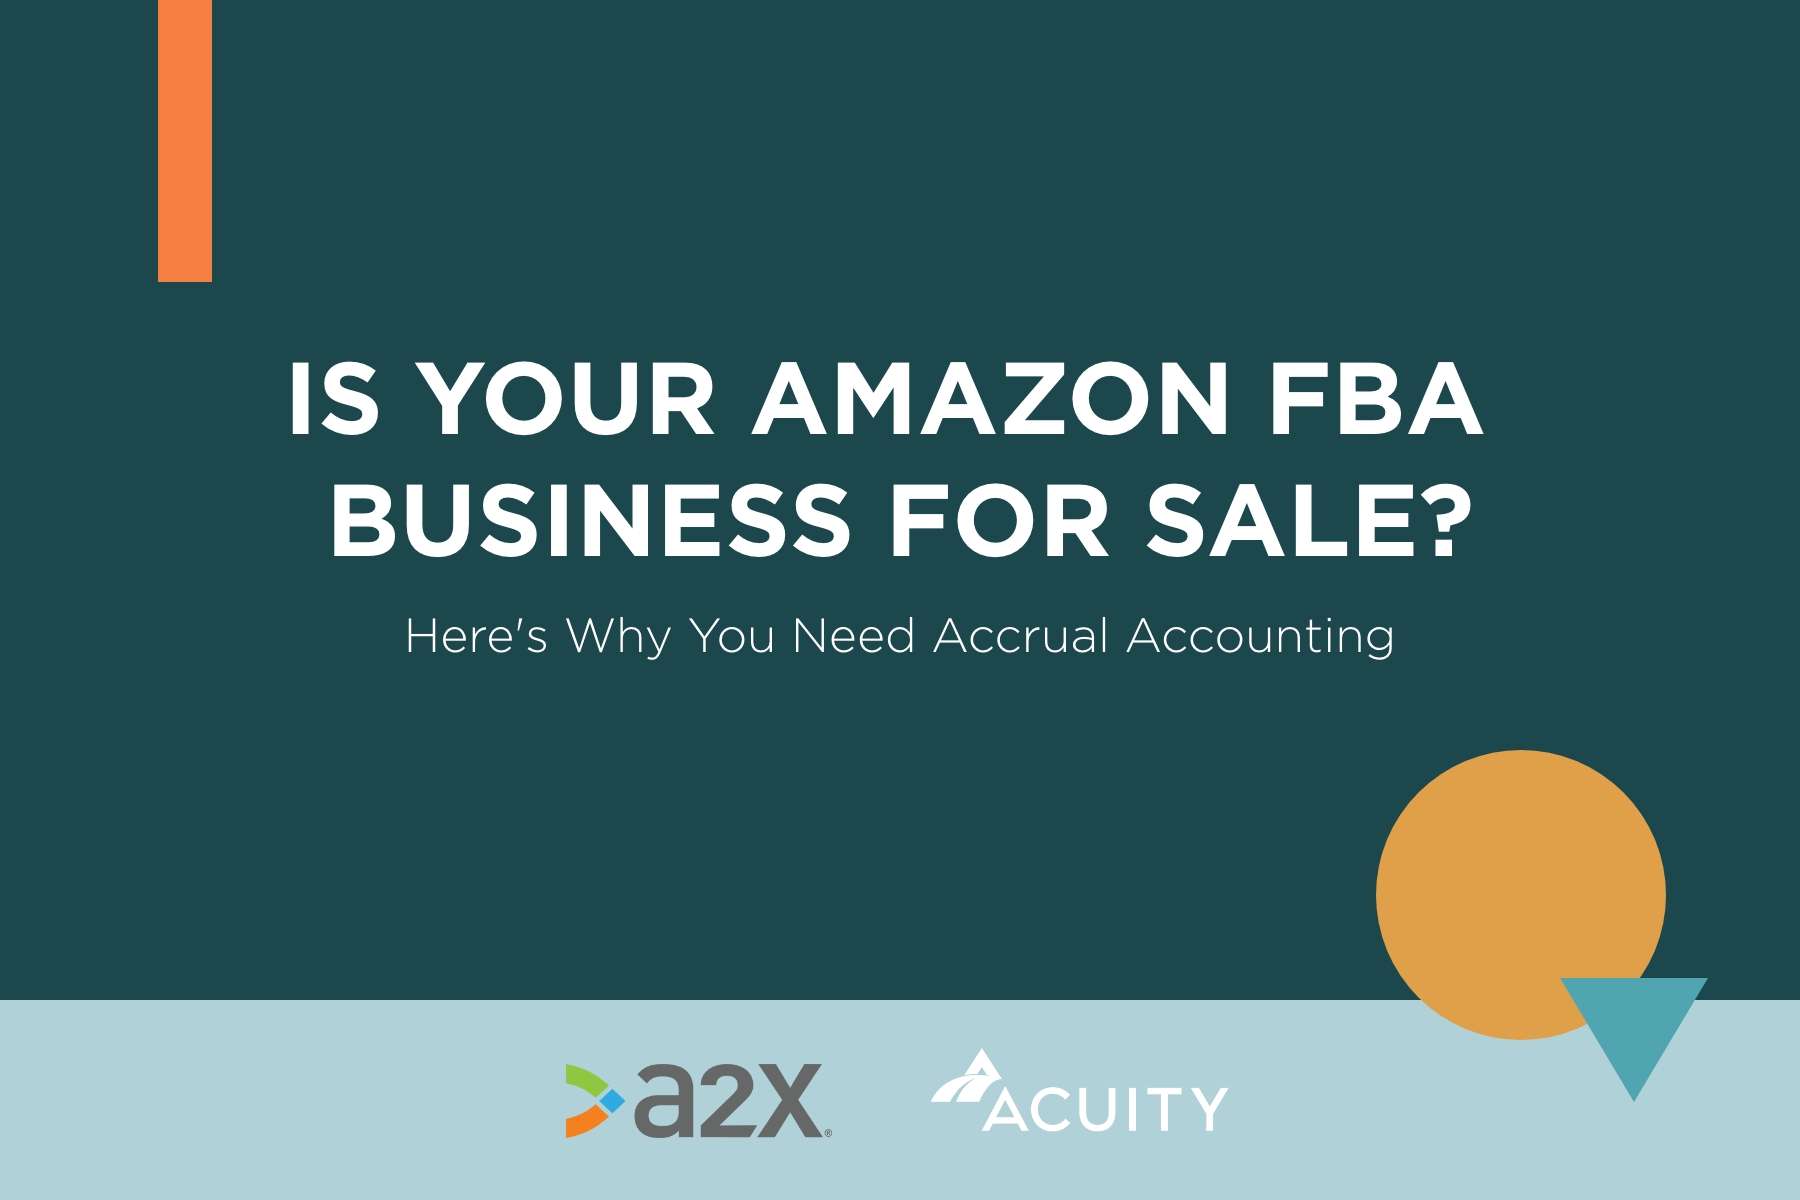 Selling Your Amazon FBA Business? Here’s Why You Need Accrual Accounting